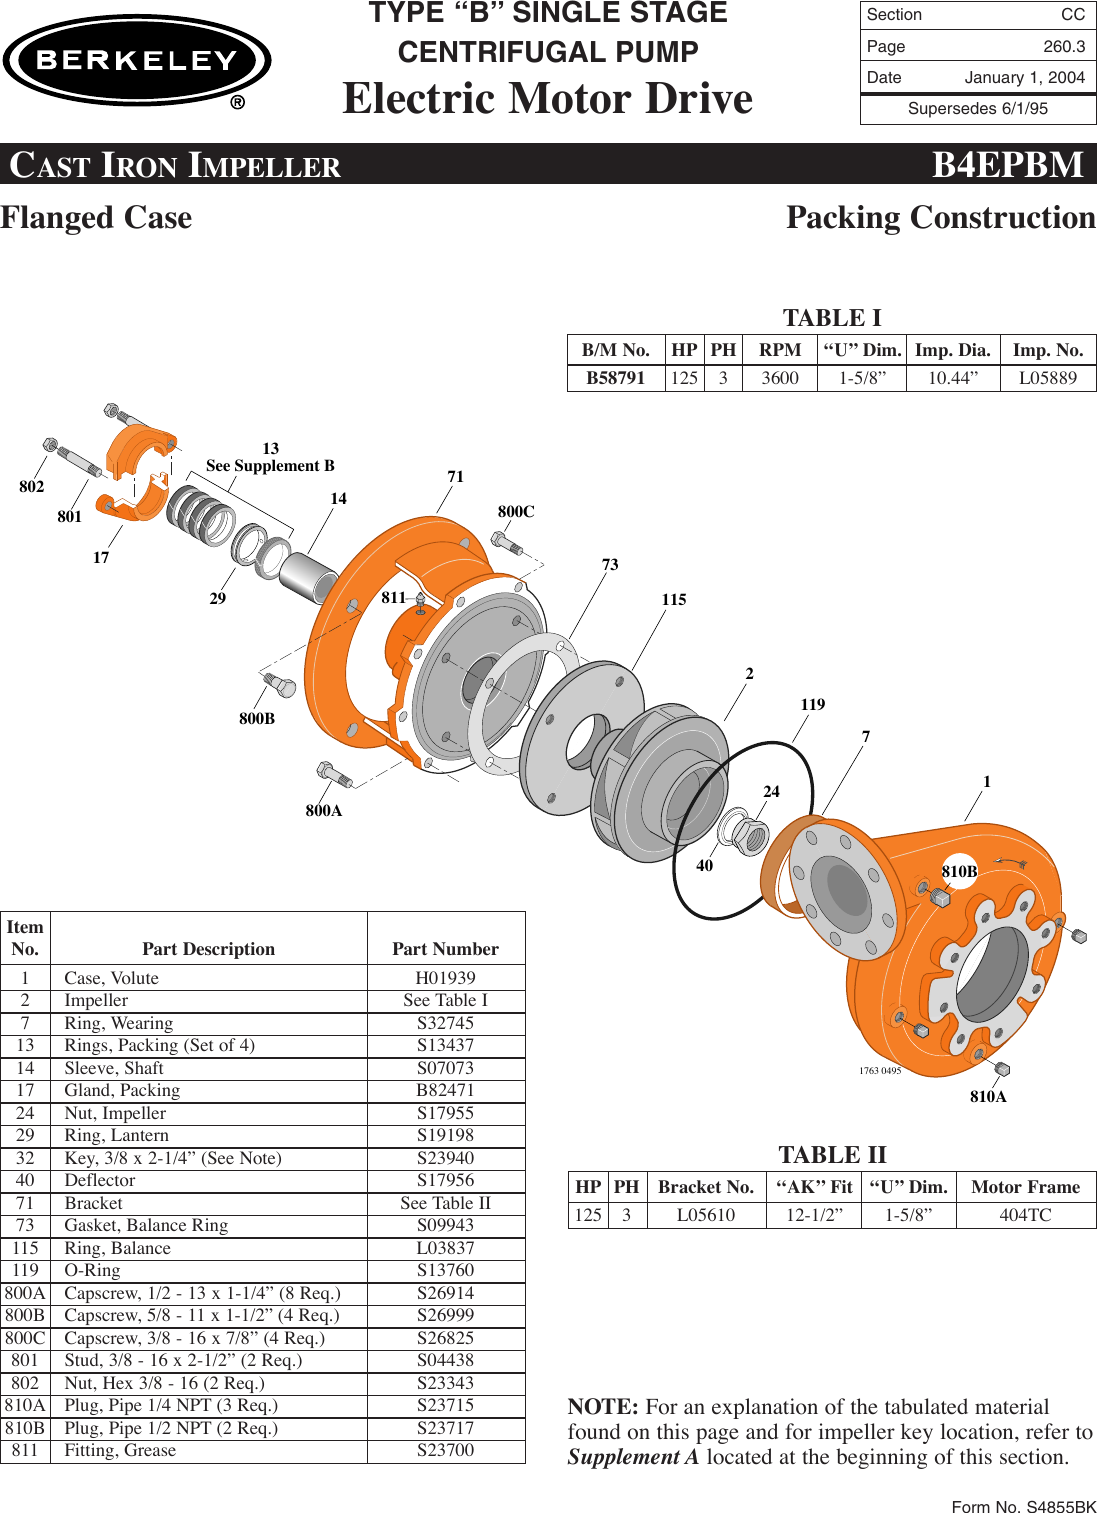 Page 3 of 9 - FM Section  552378 1 Berkeley Type B Centrifugal Pump Repair Parts